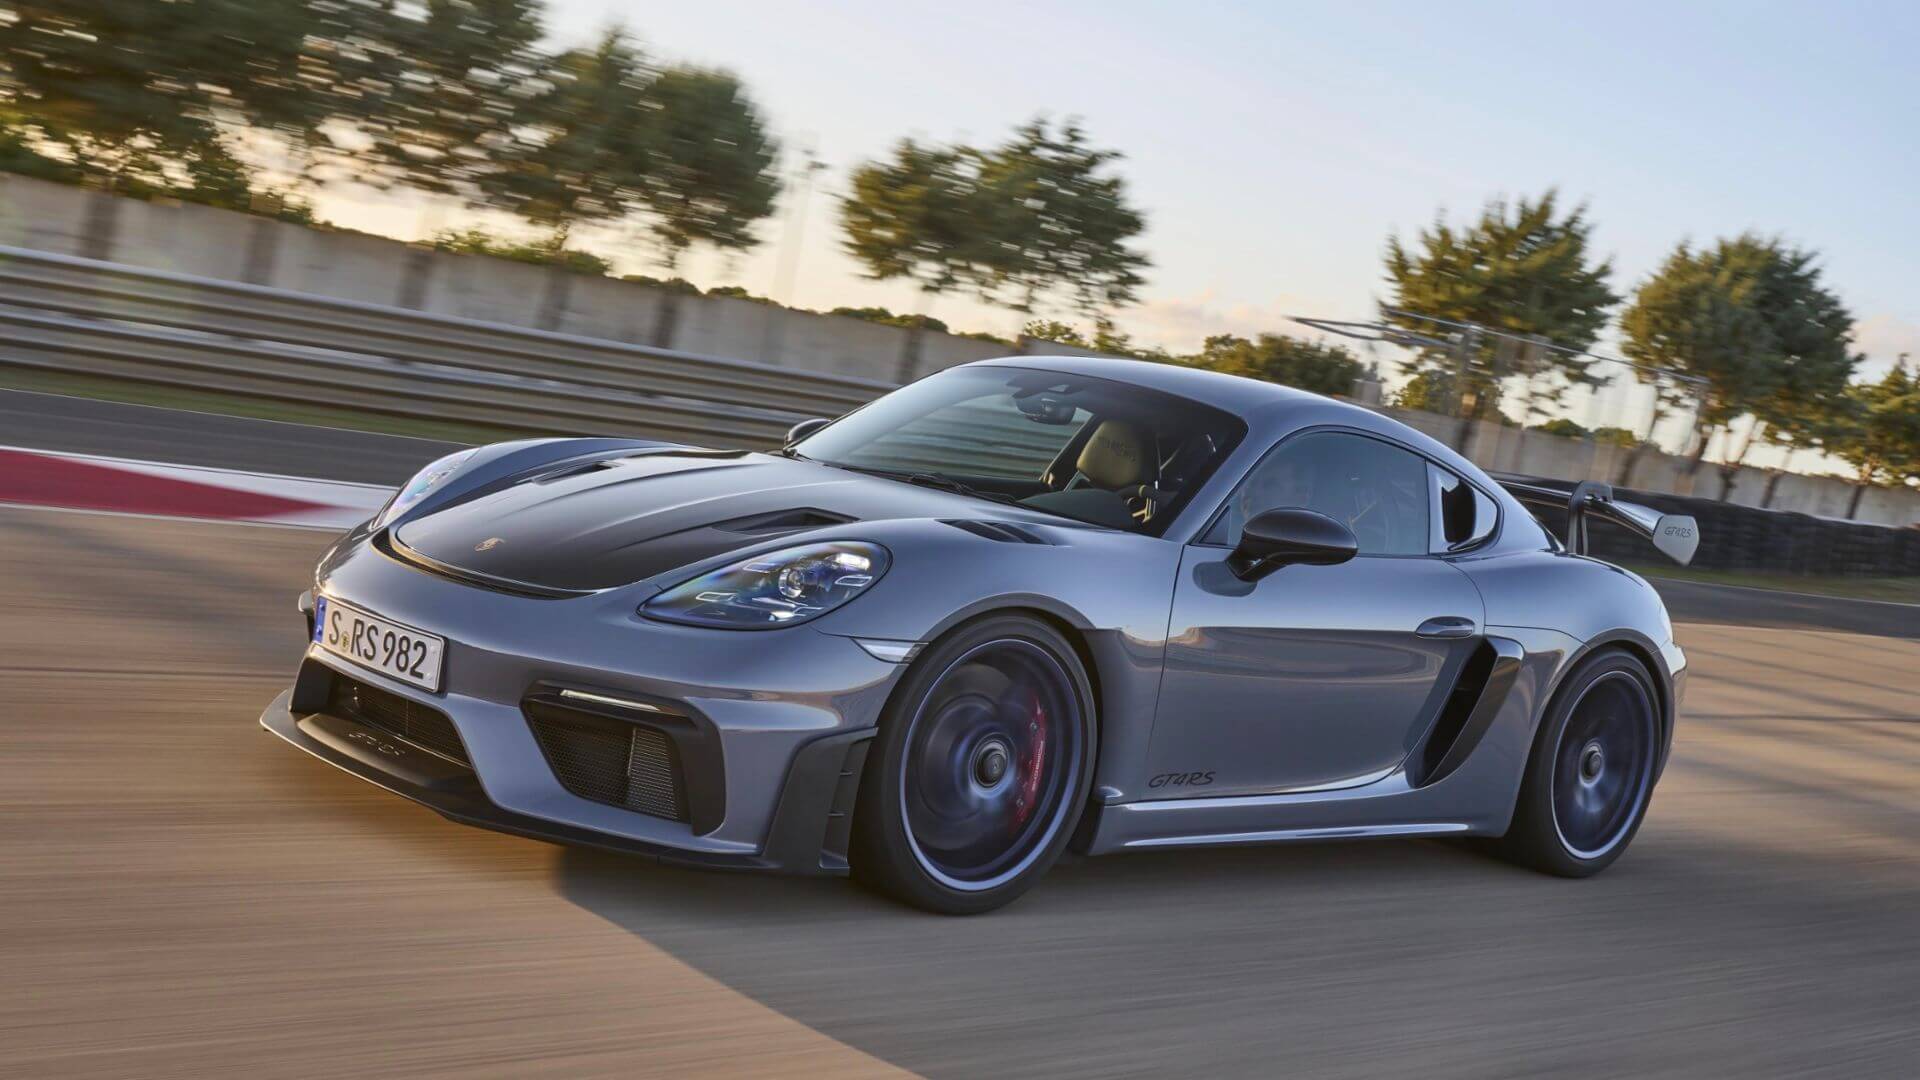 Porsche 718 Cayman GT4 RS: the new street-track fury